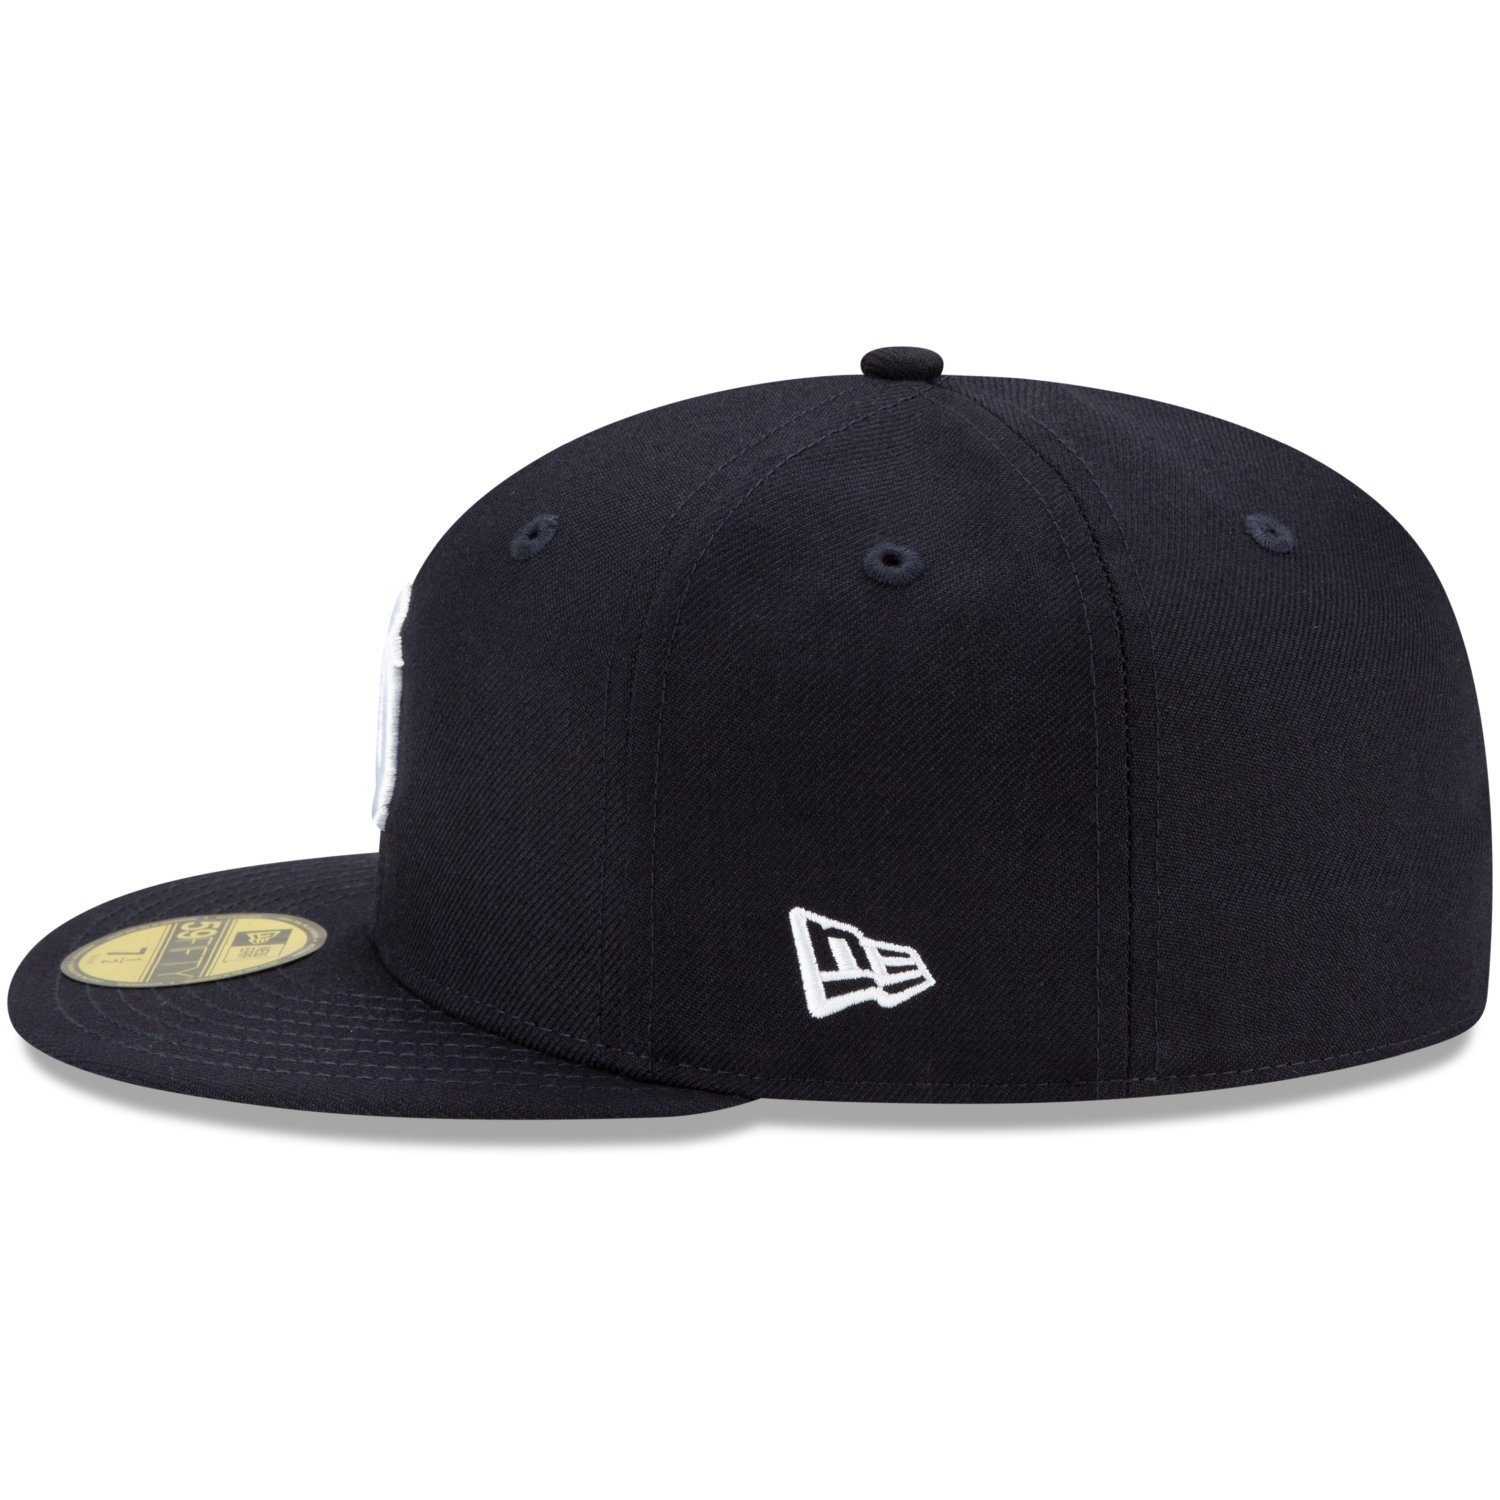 Cap Fitted LIFESTYLE Yankees New 59Fifty New Era York